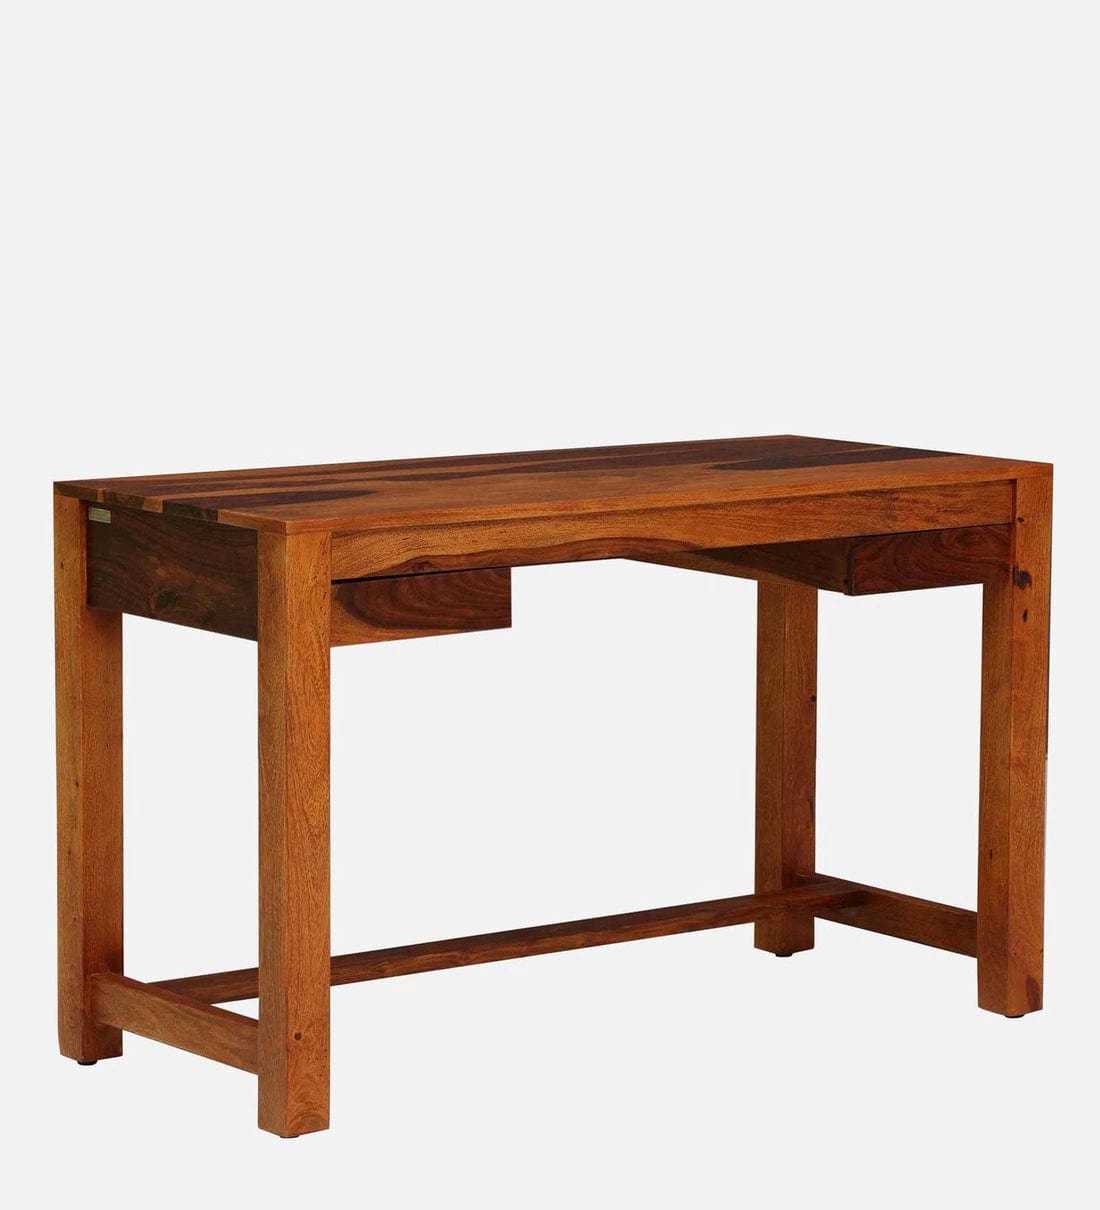 Claire Sheesham Wood Writing Table In Rustic Teak Finish,